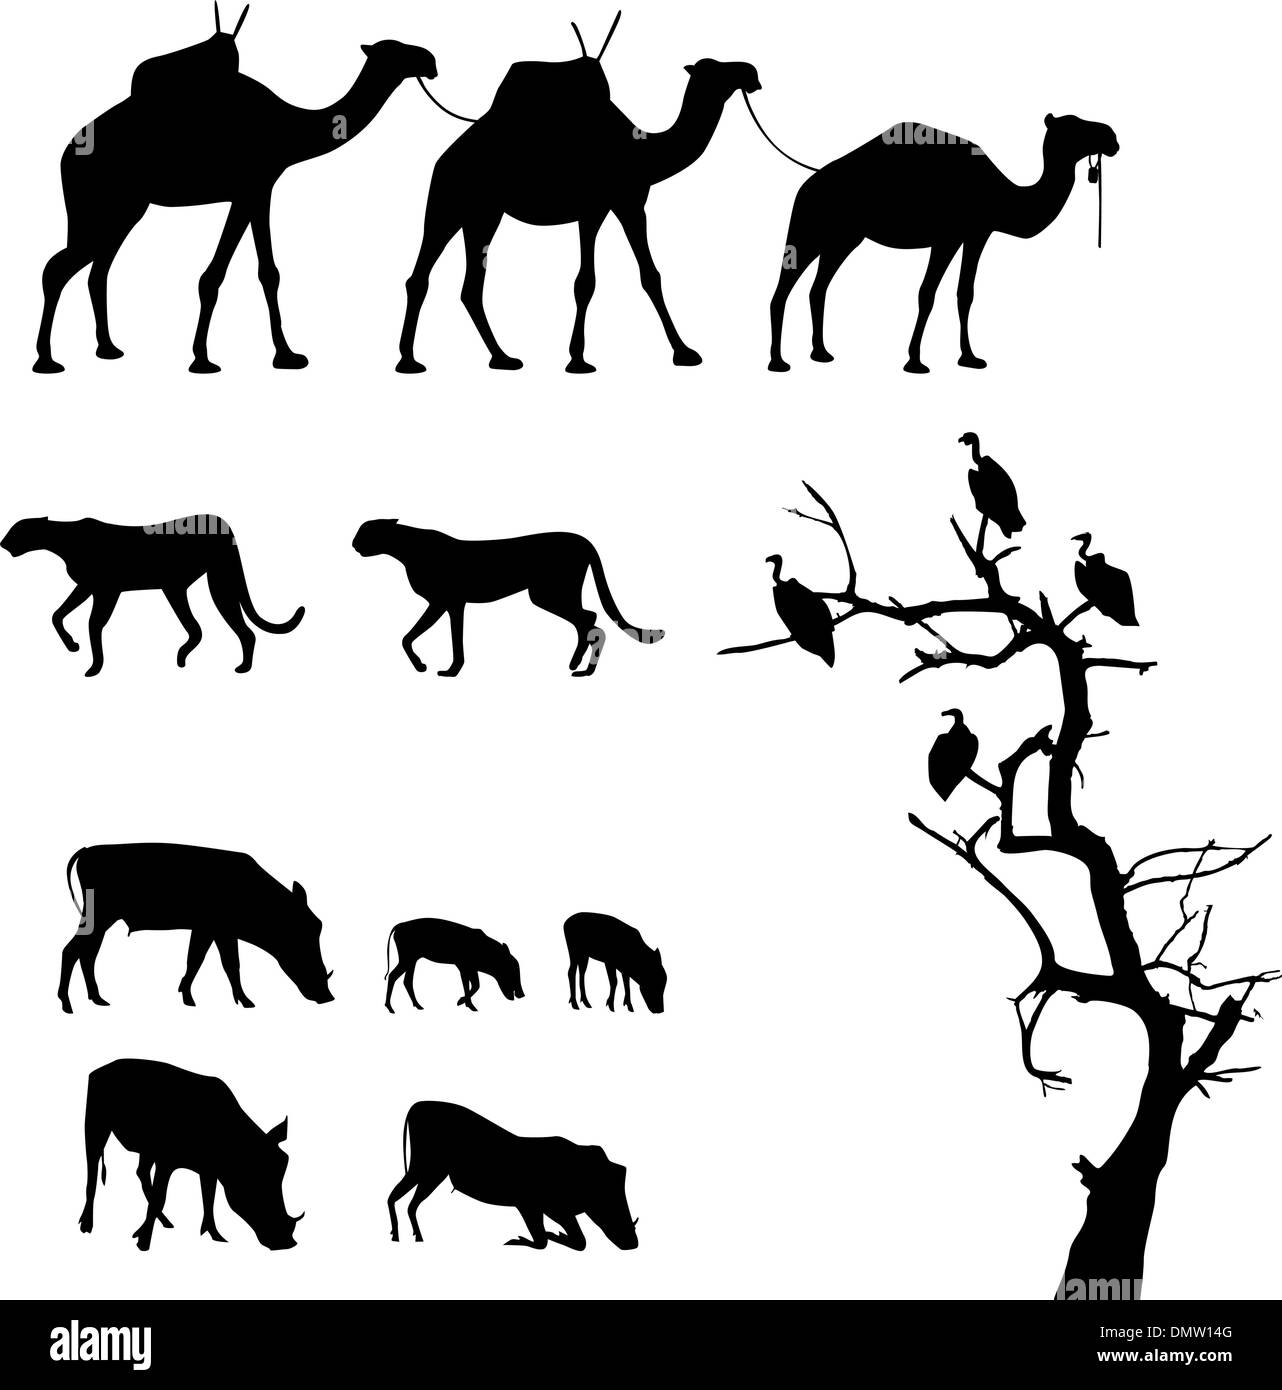 African animals, vector silhouettes Stock Vector